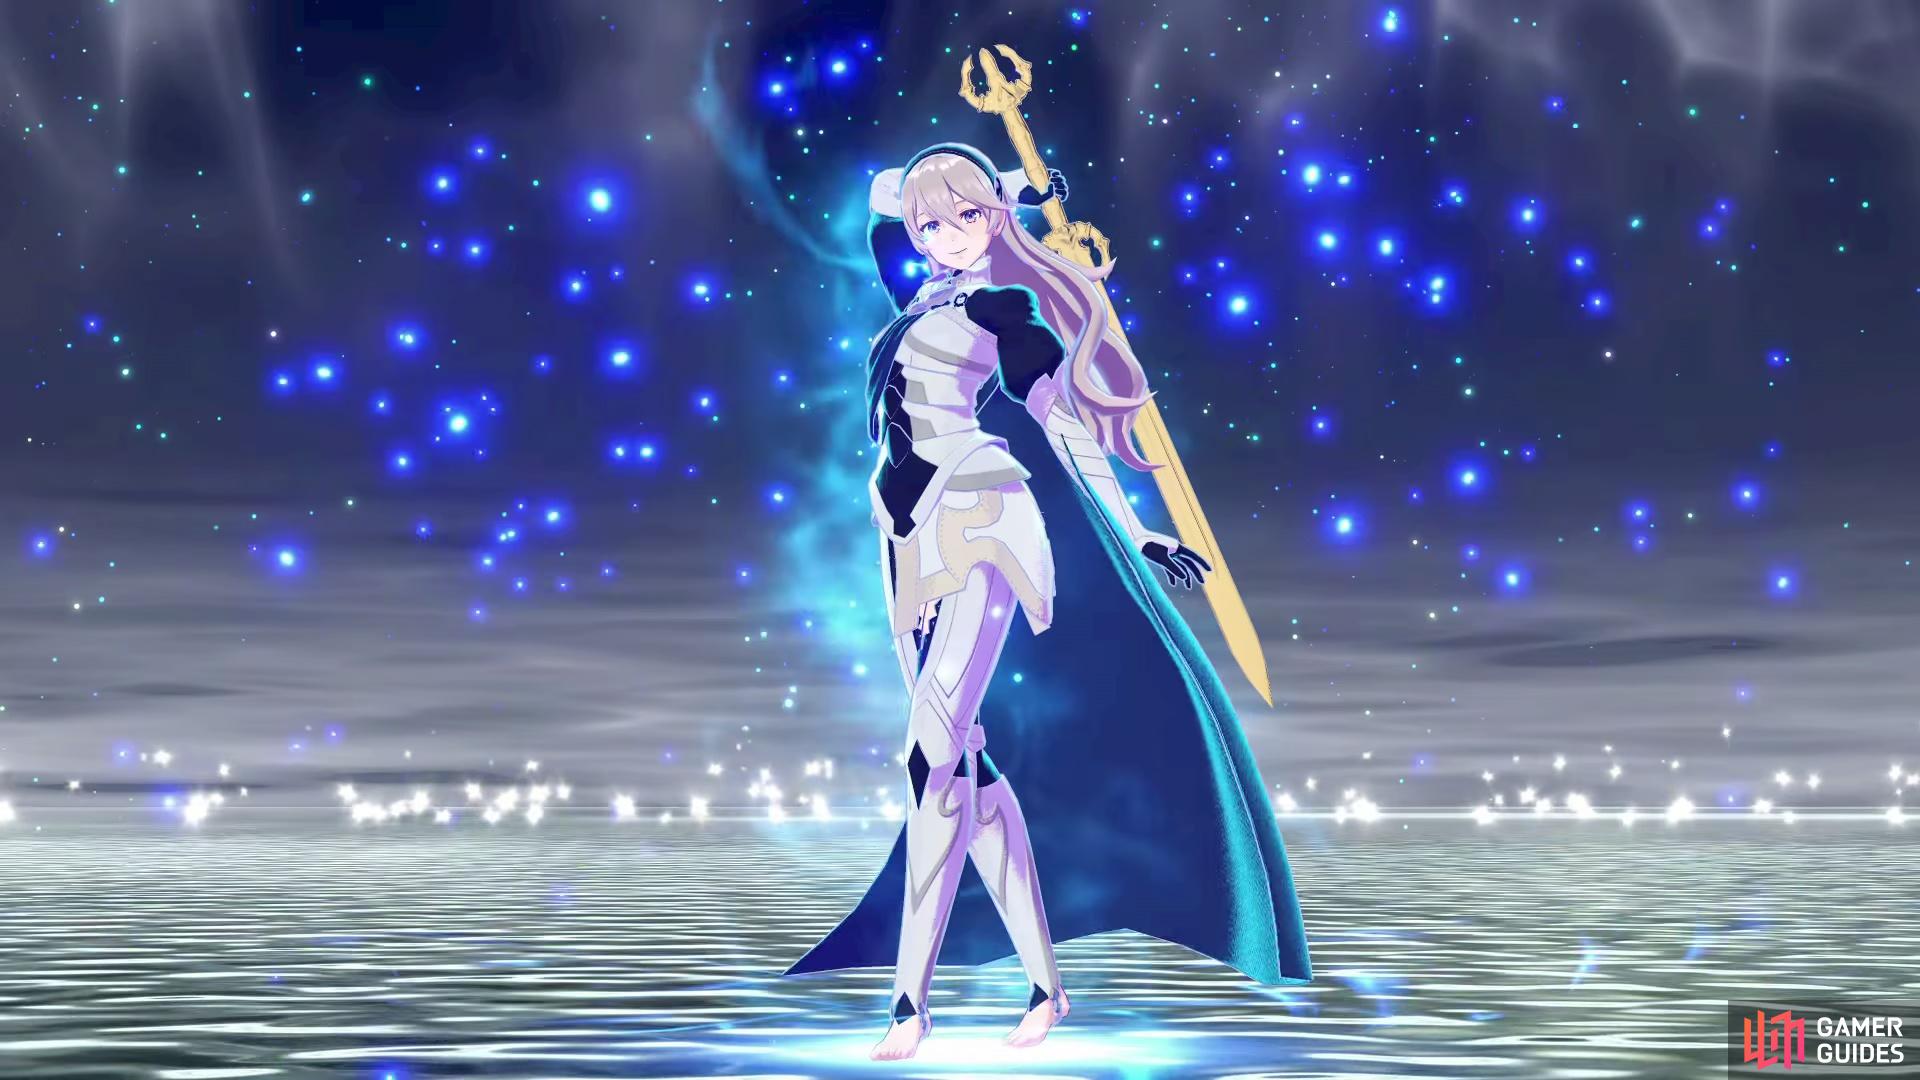 You will obtain Corrin in Chapter 15.